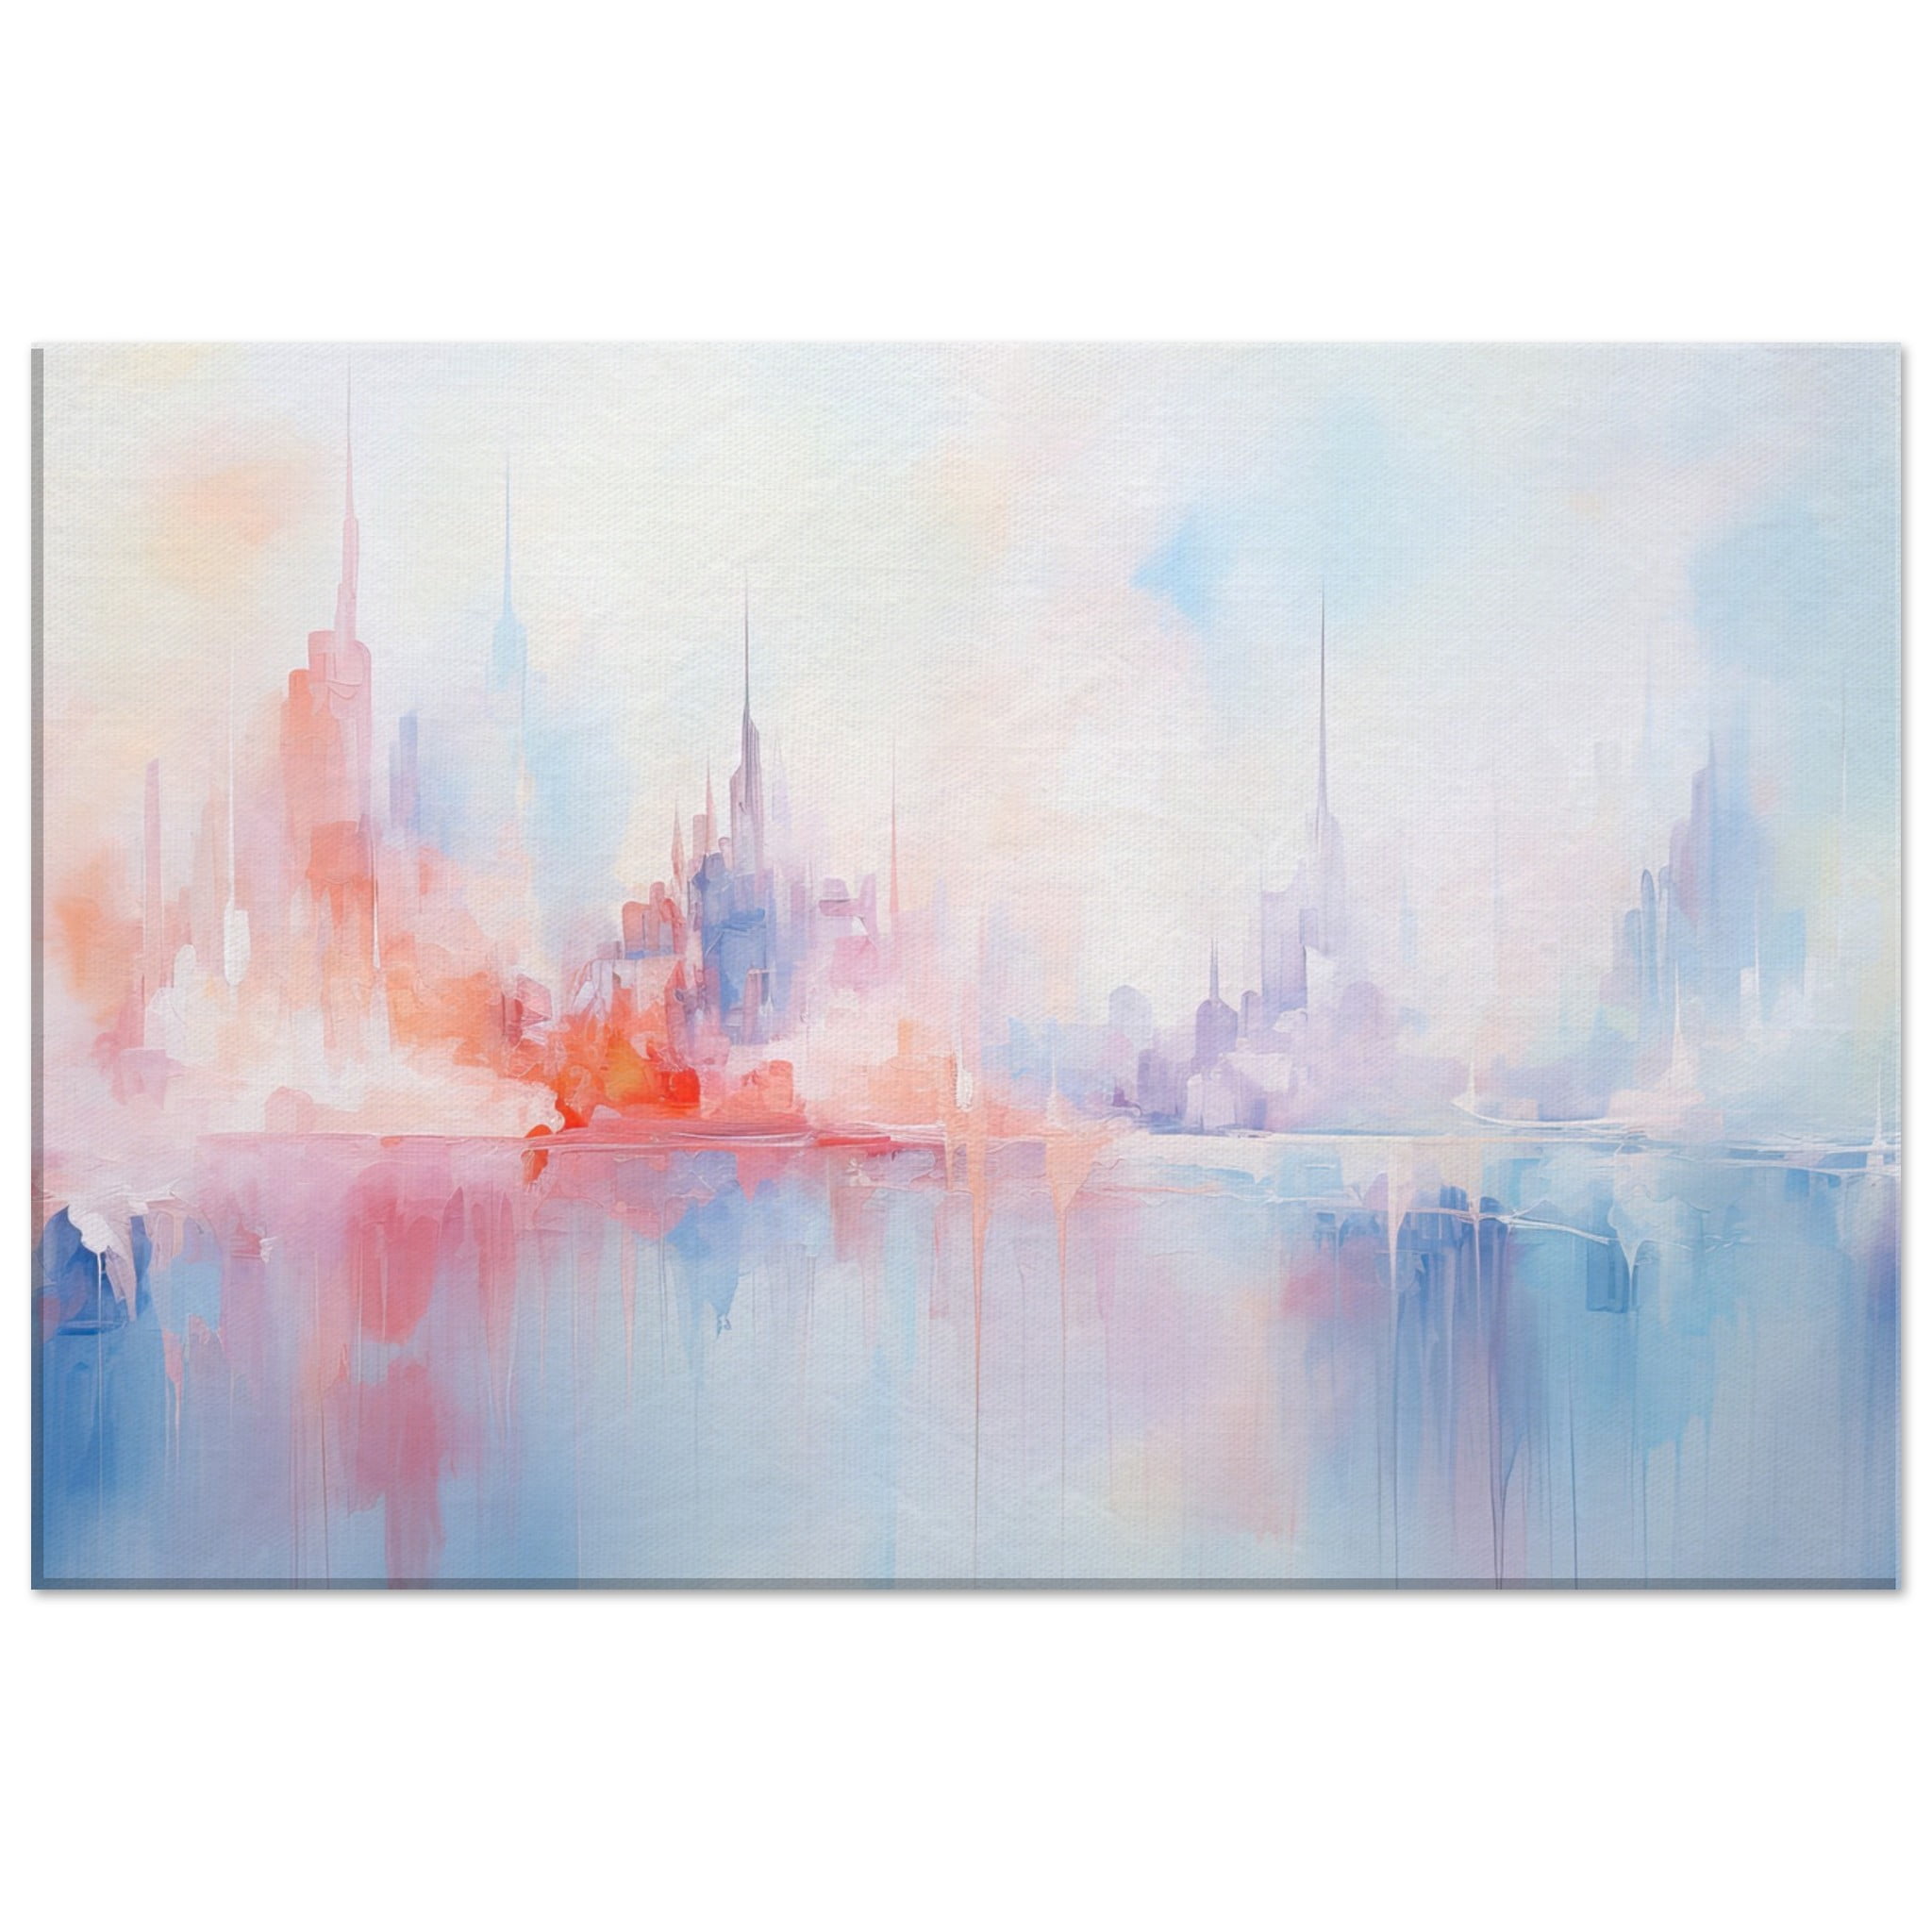 Pastel Abstract City Skyline Canvas Print – 40×60 cm / 16×24″, Thick